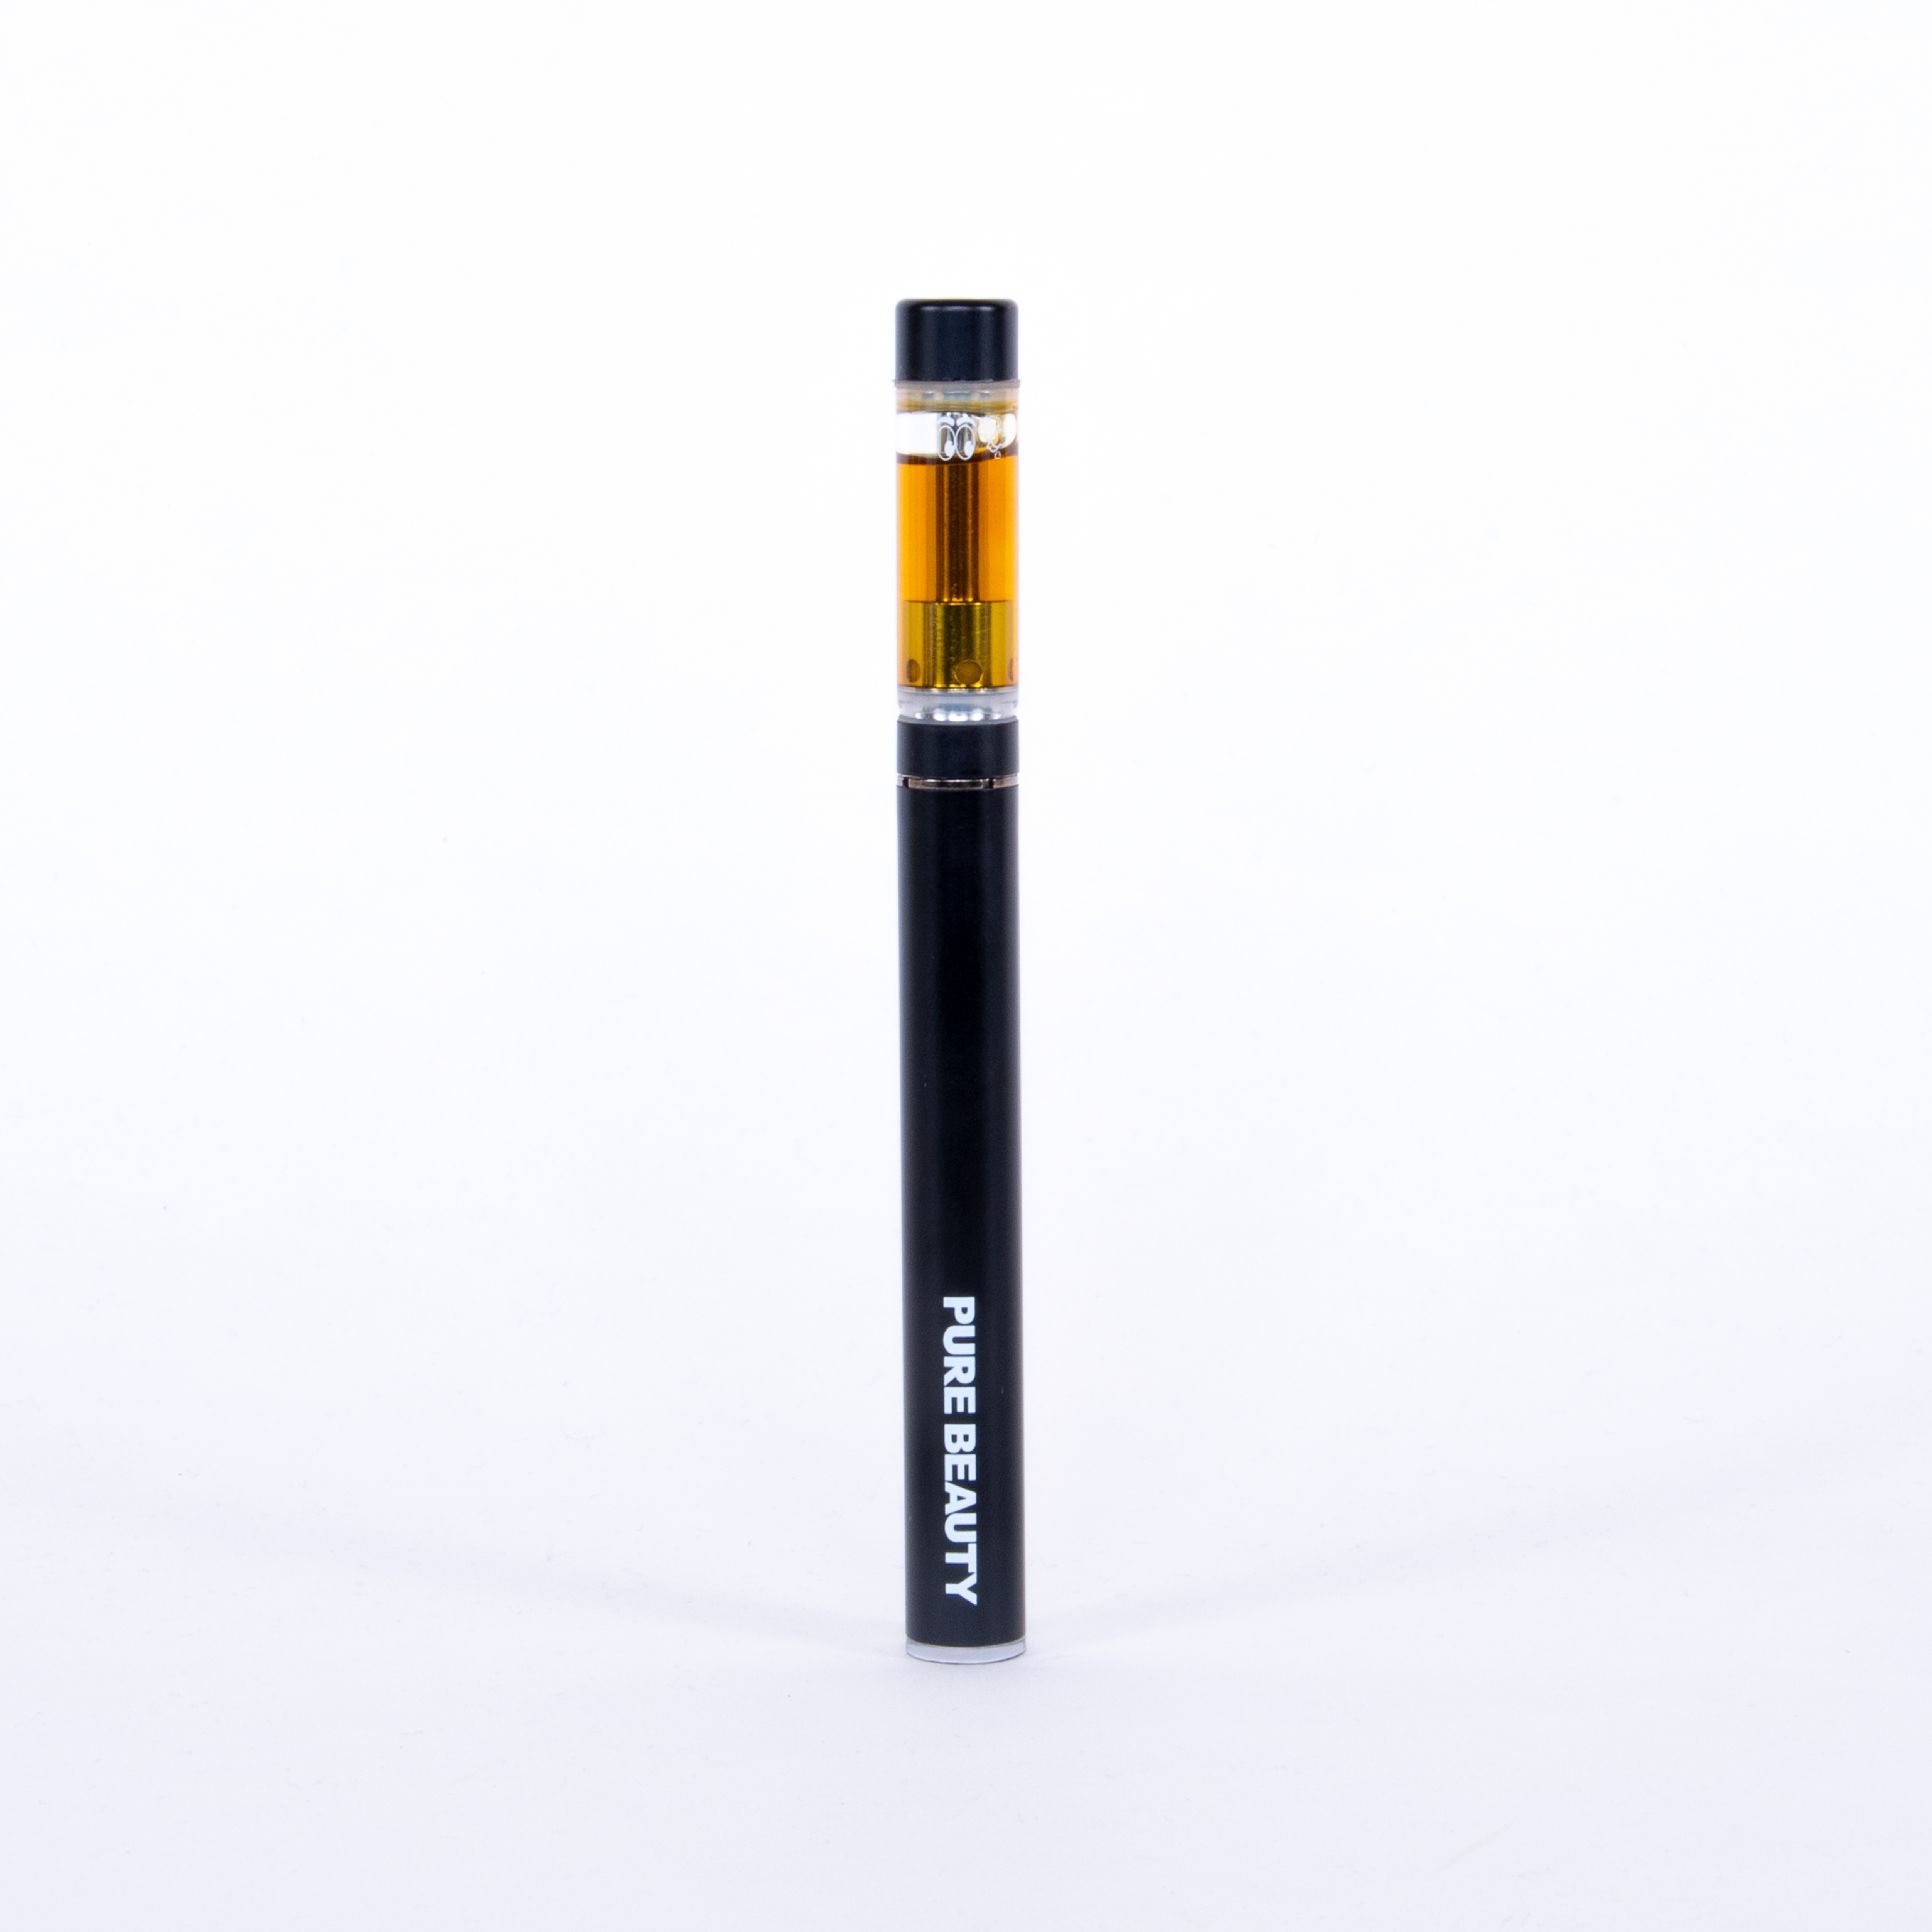 A photograph of Pure Beauty 510 Battery Black